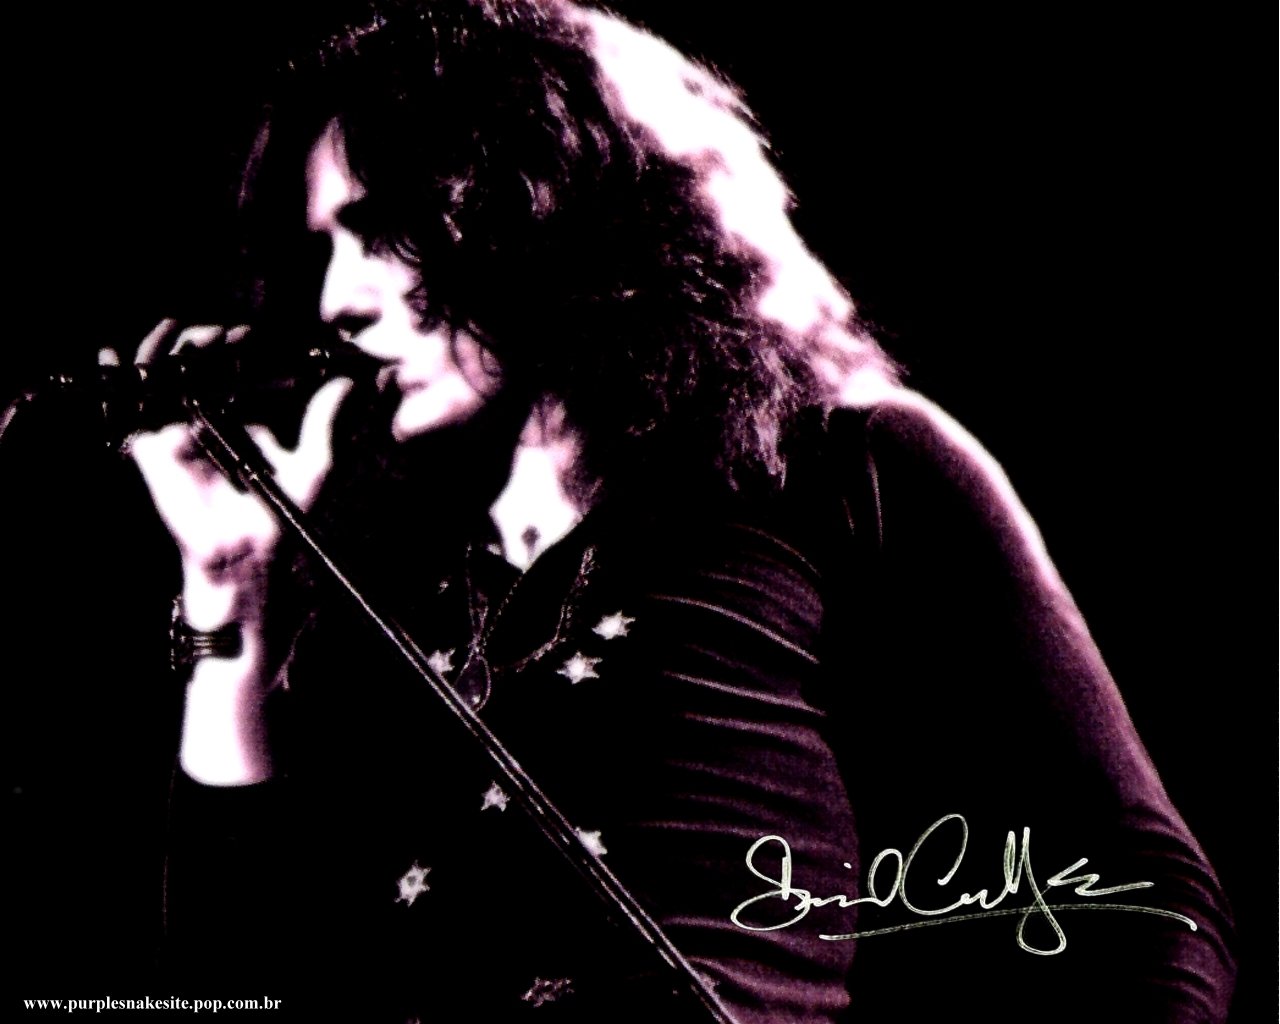 David Coverdale Photo (16 of 66)